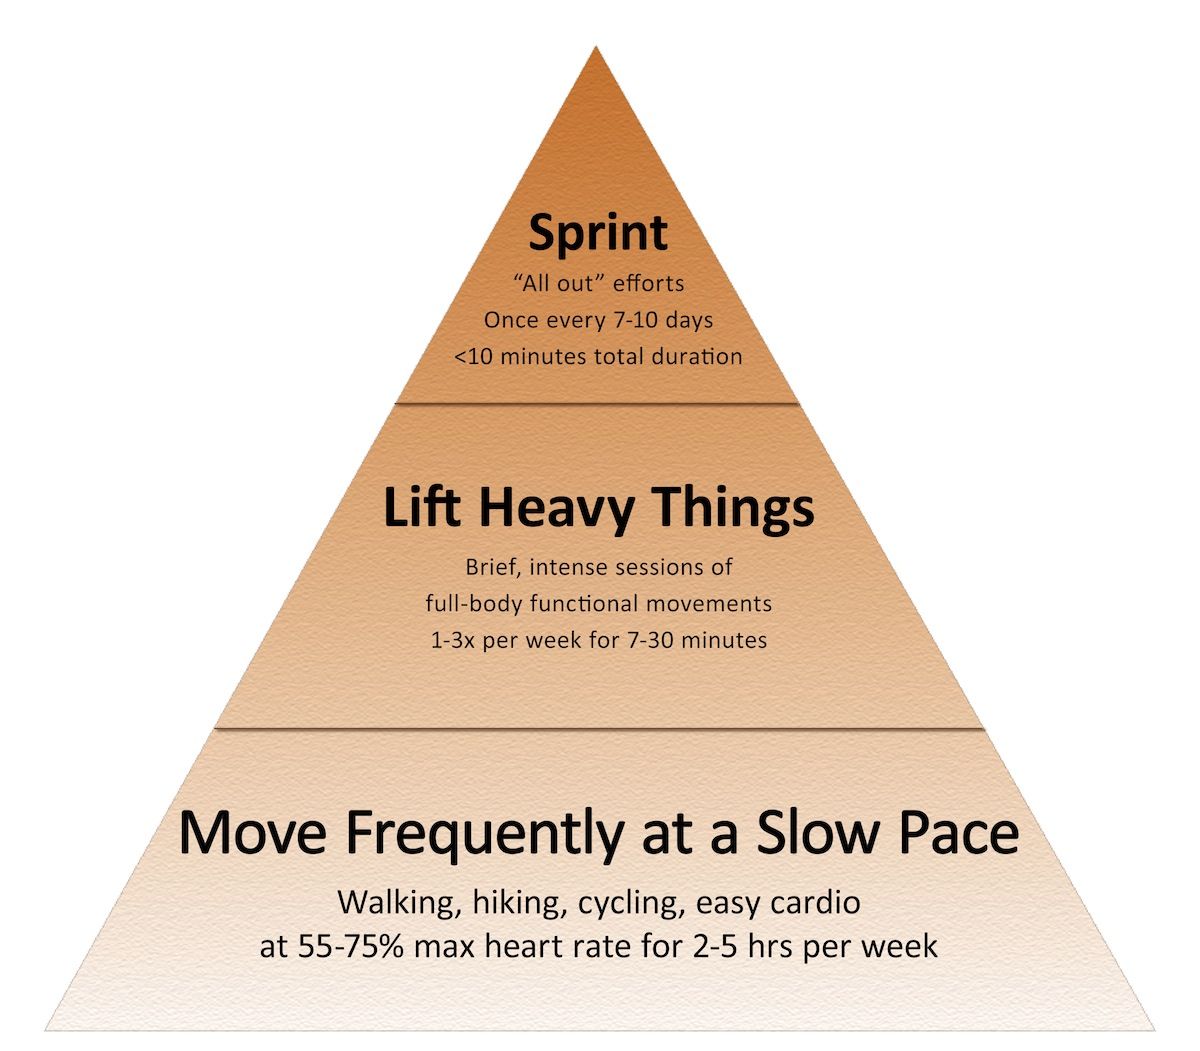 physical fitness pyramid